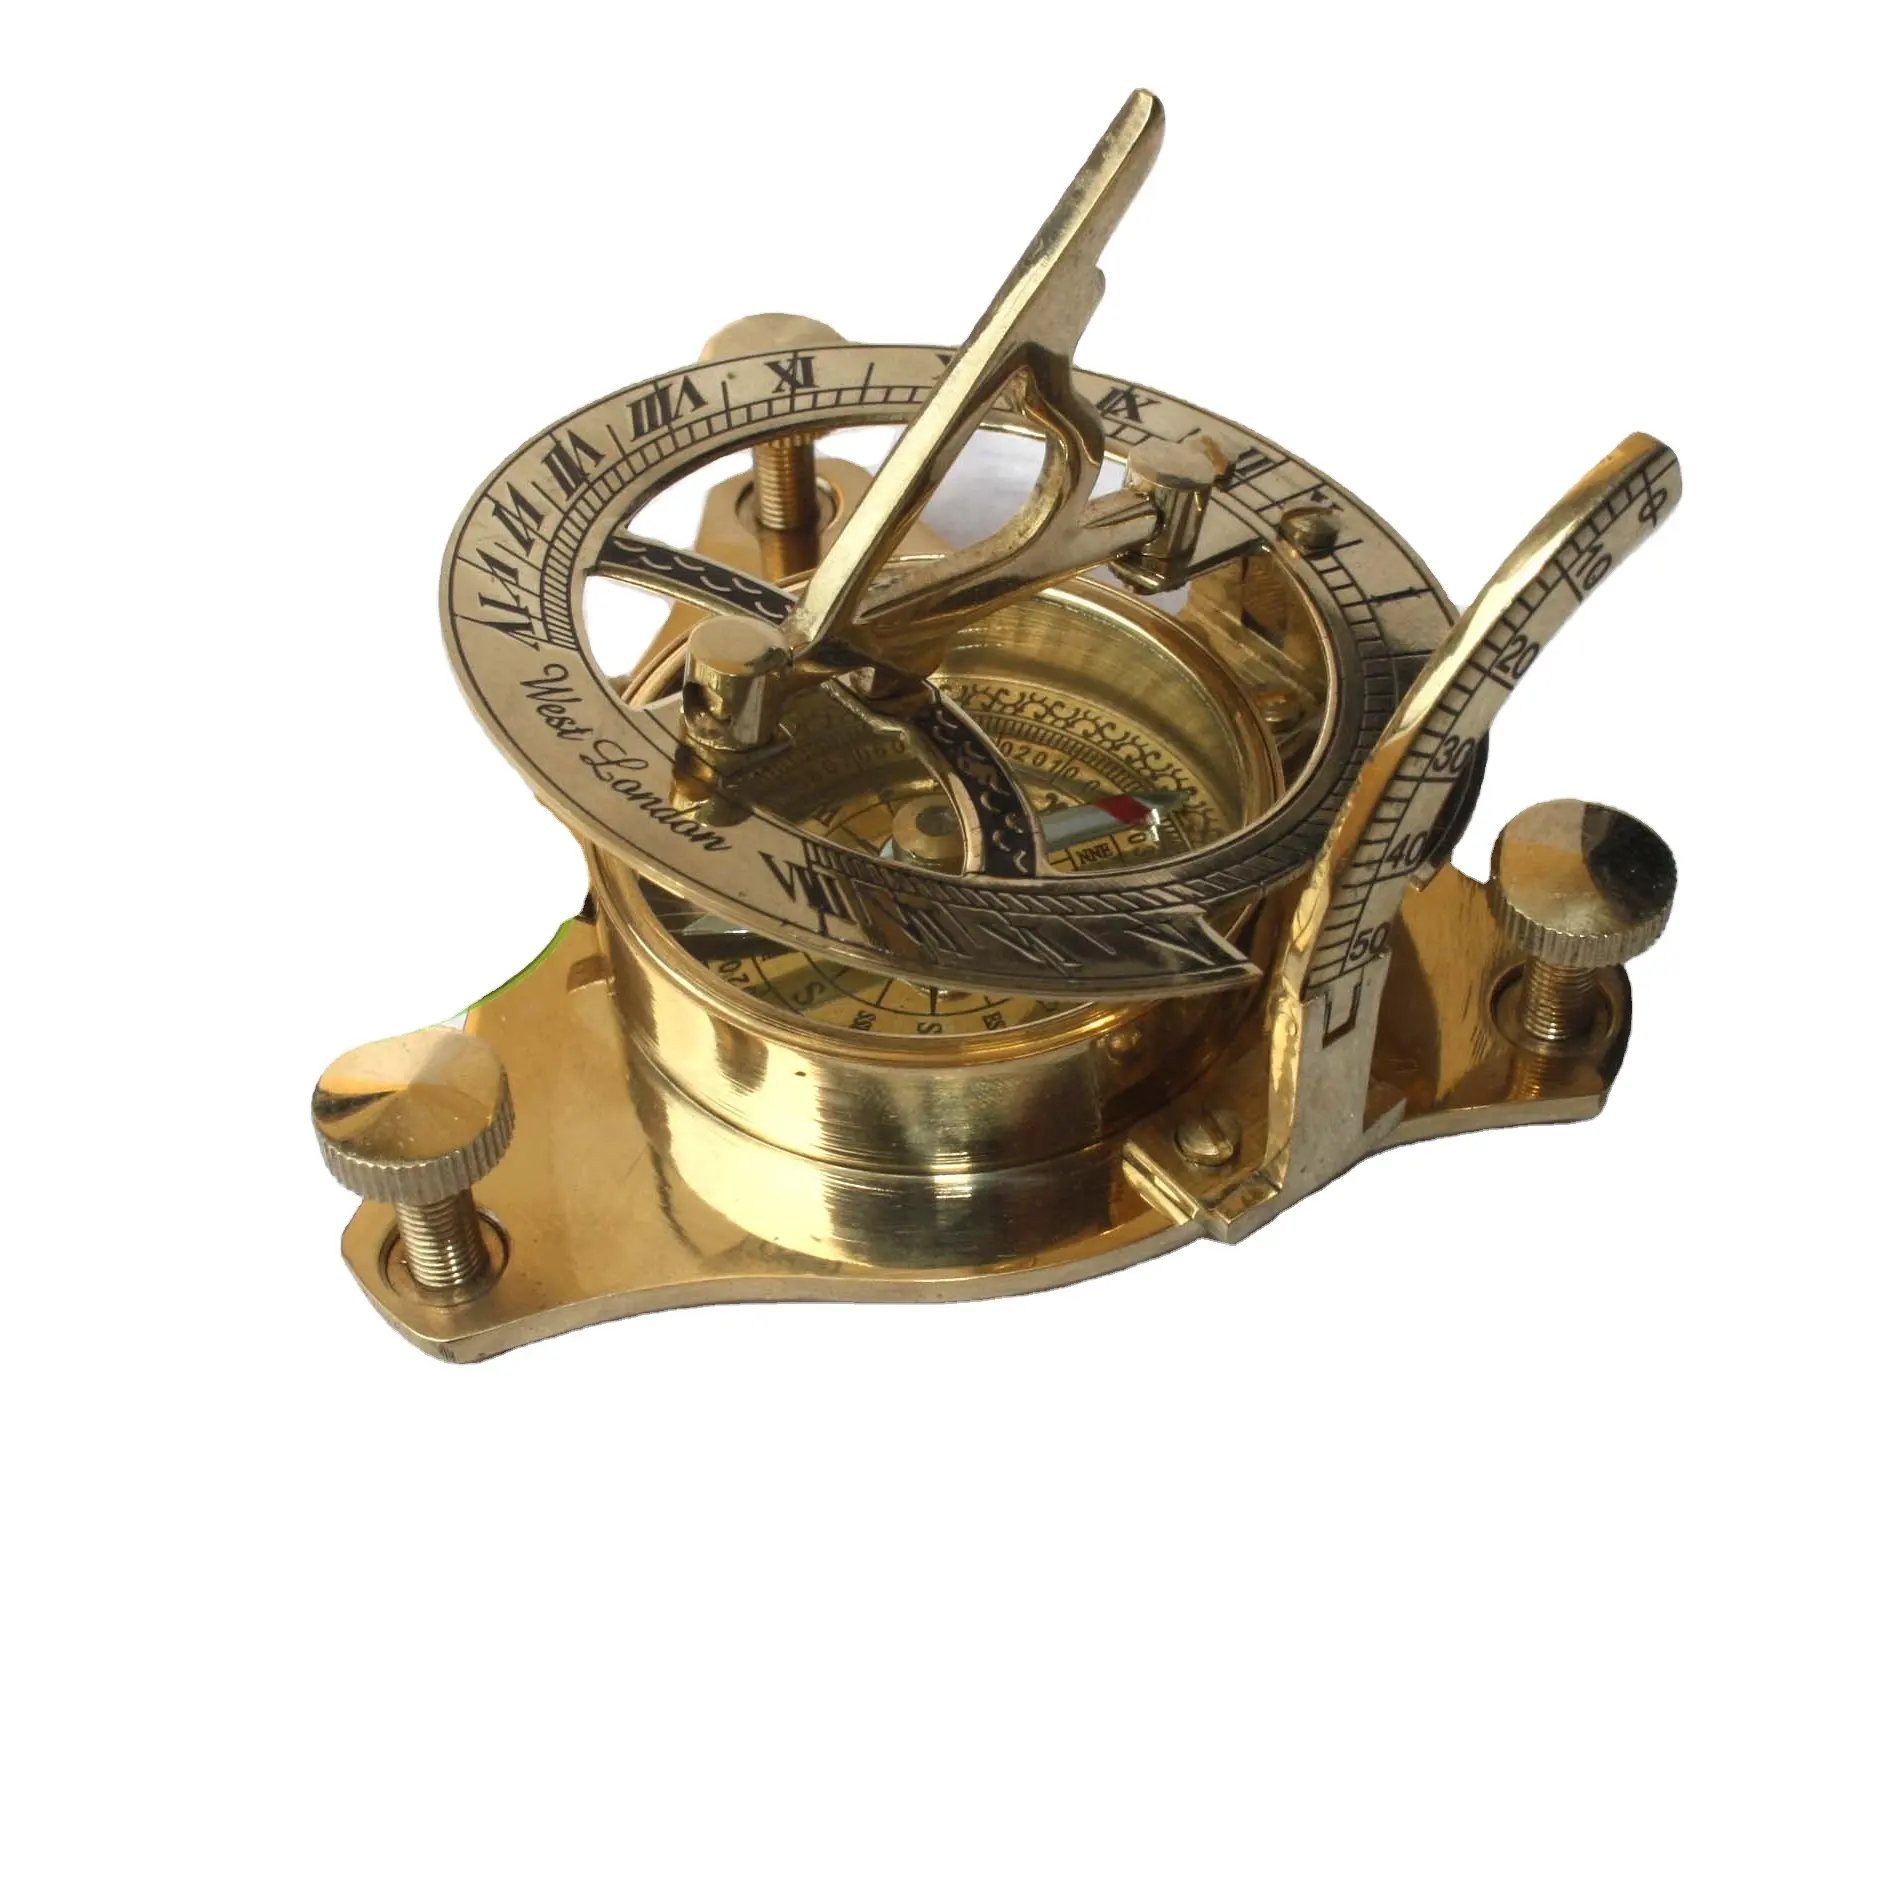 INAM'S top handmade designer and beautiful brass compass with beautiful sundial by INAM HANDICRAFTS